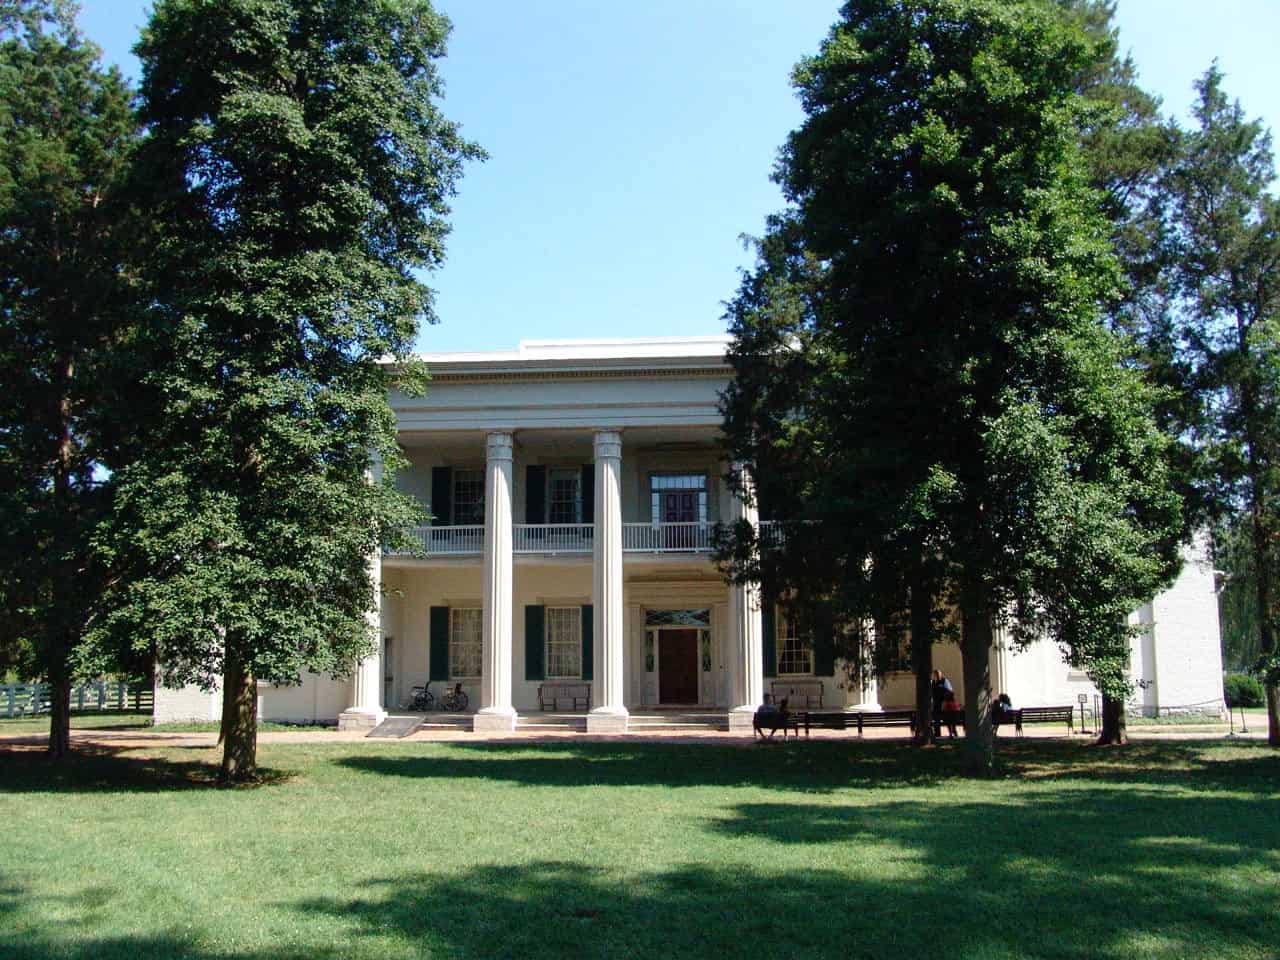 The Hermitage in Nashville, Tennessee